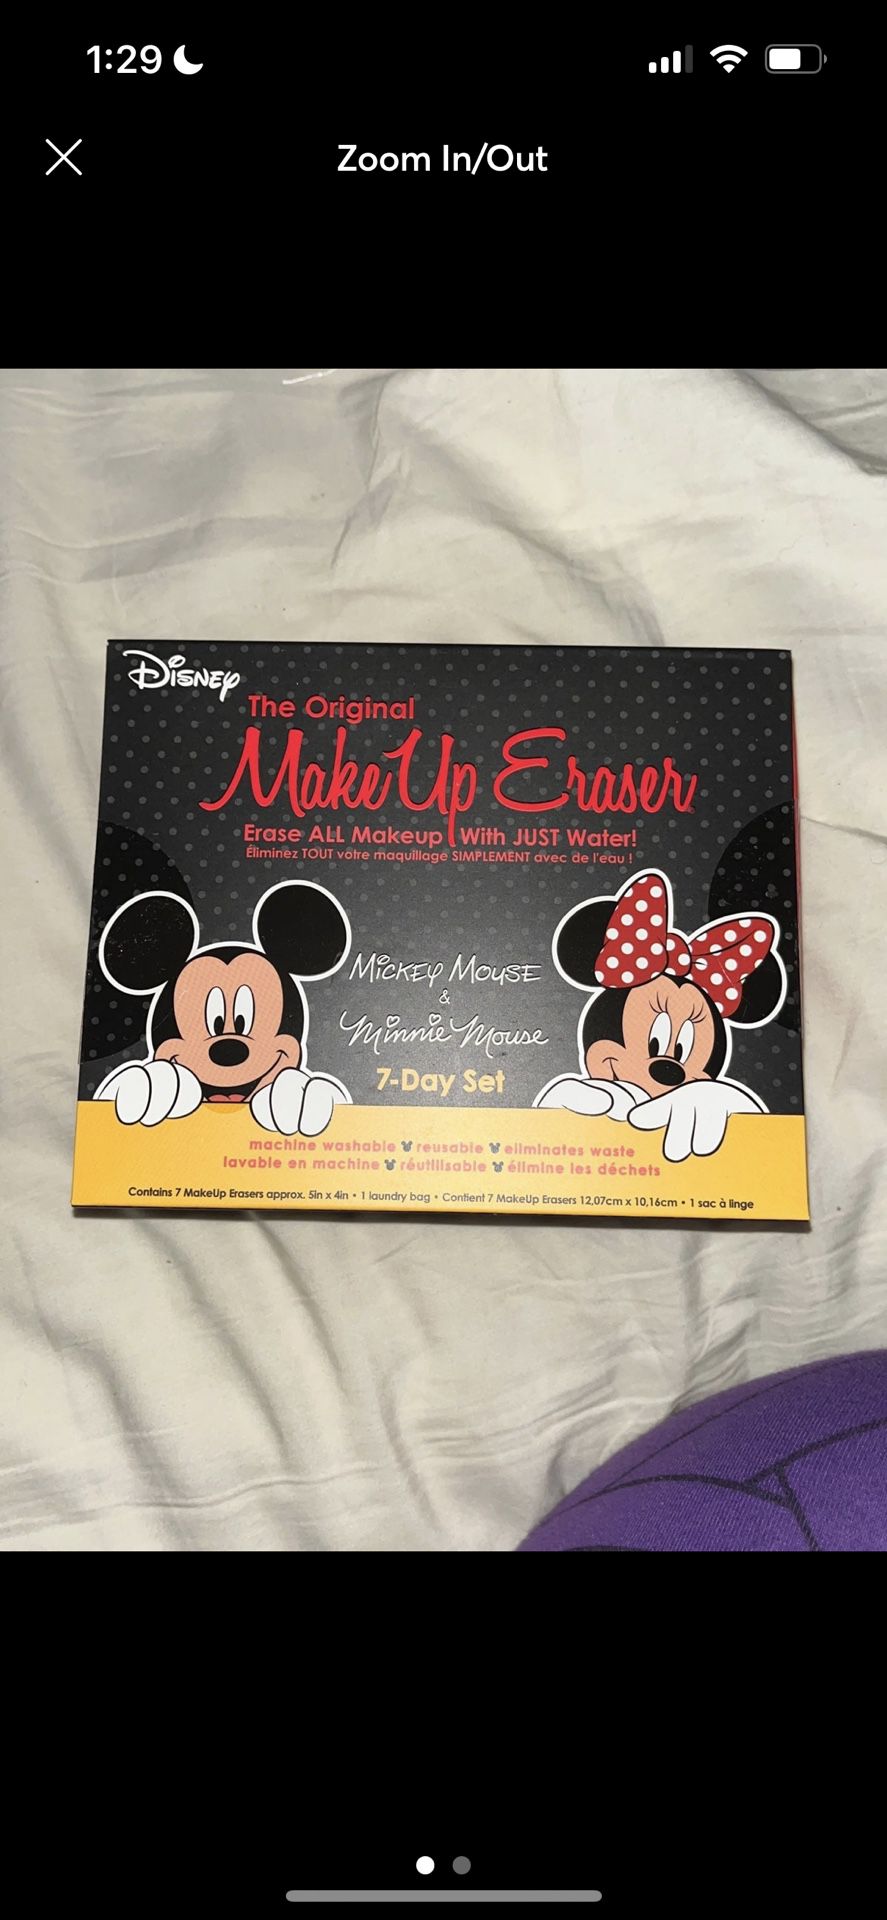 Disney Makeup eraser Mickey and Minnie Mouse 7 Day set